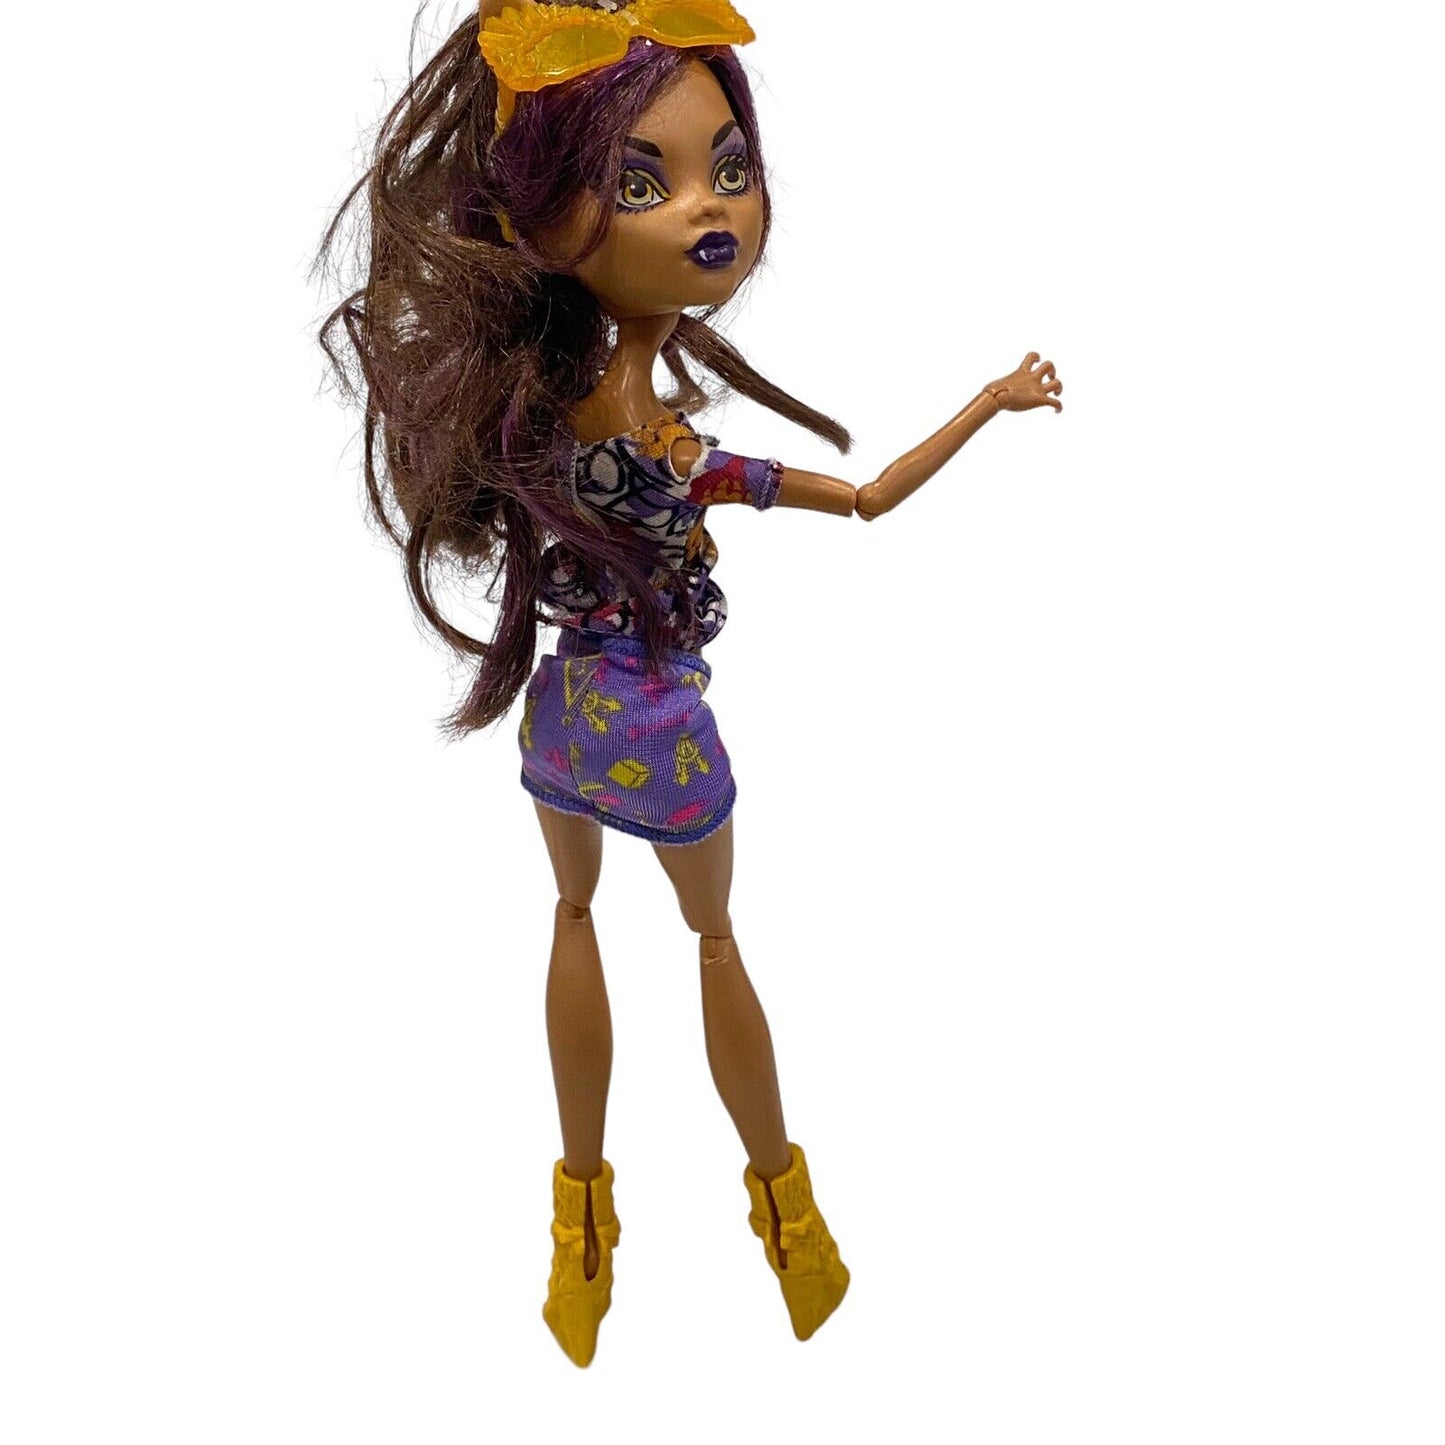 2008 Monster High Boo York Frightseers Clawdeen Wolf Doll w/ Sunglasses & Boots